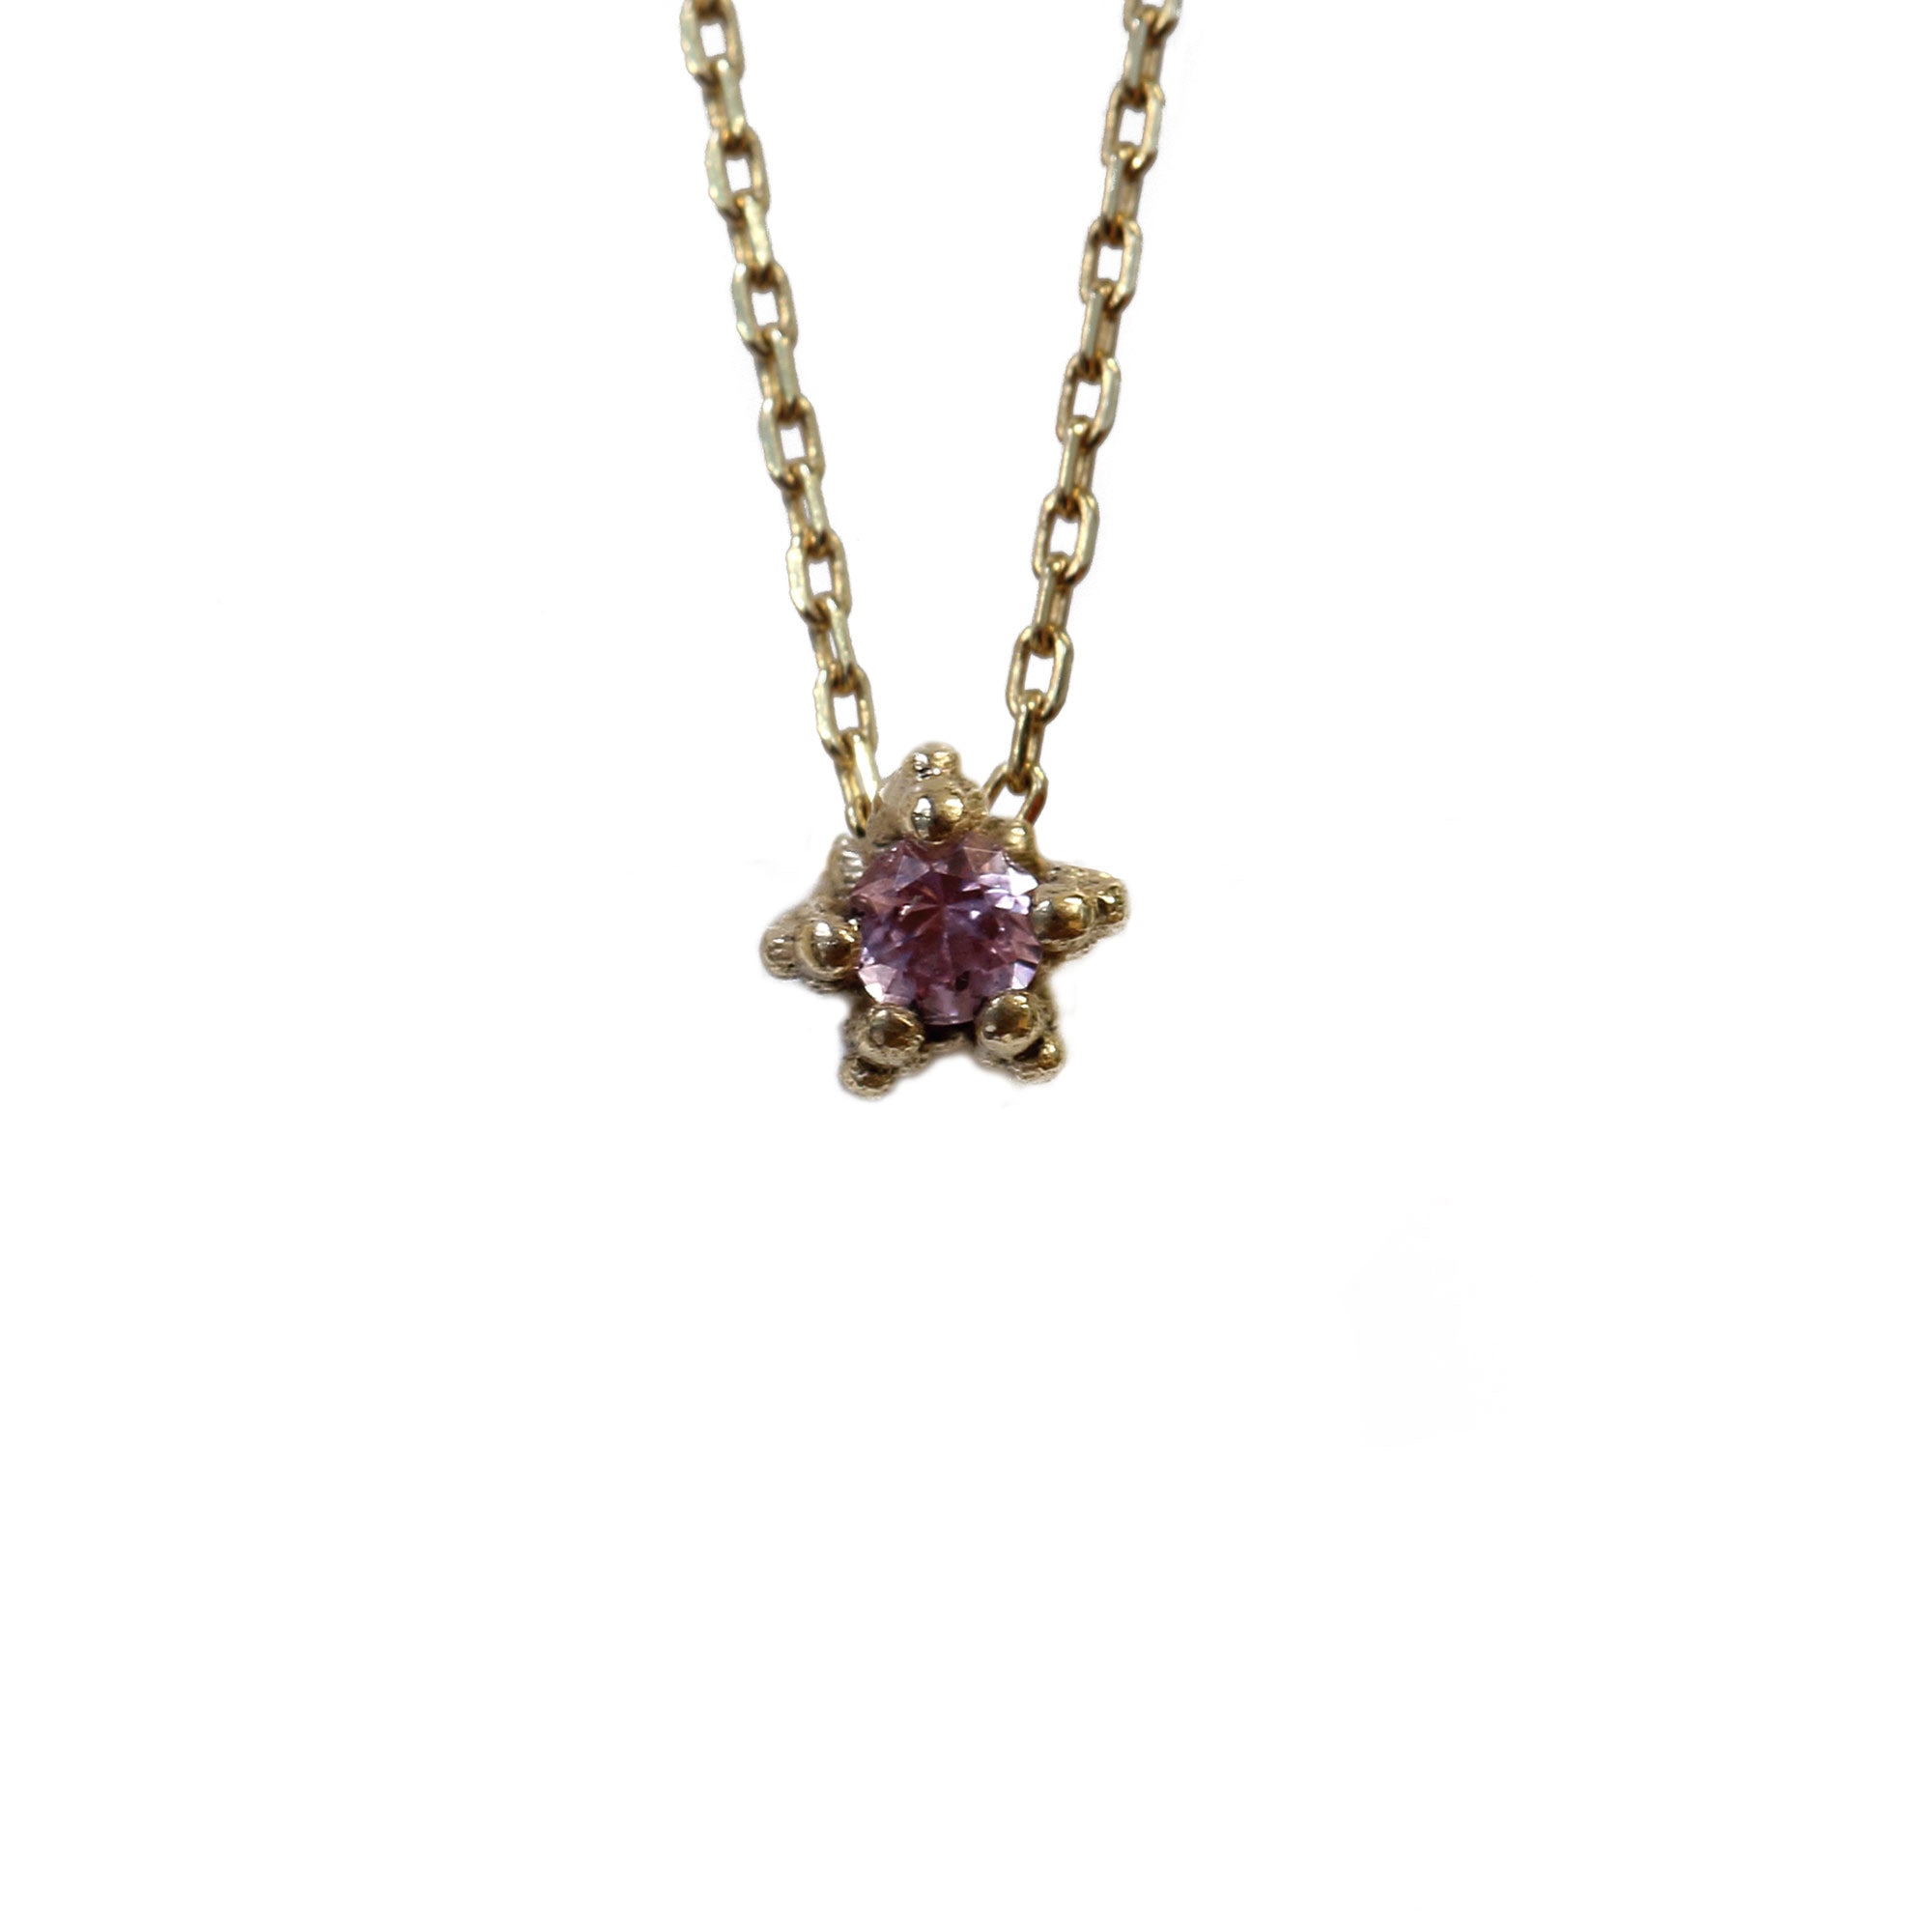 Tiny pink sapphire set textured gold necklace on white background